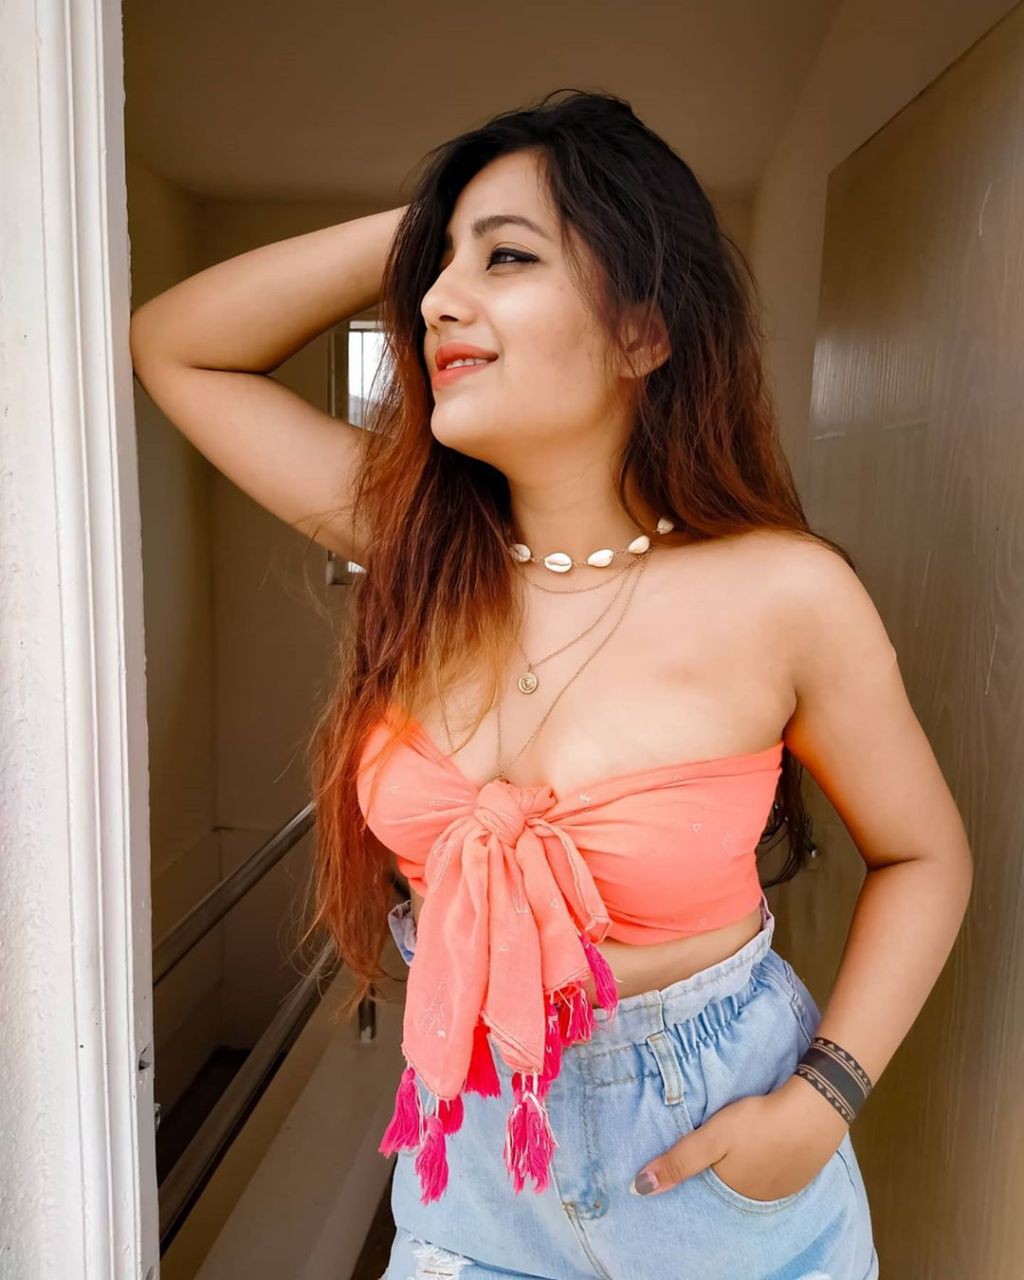 Cute Girl From Mohali Instagram Picture: Cute Teen Pics  